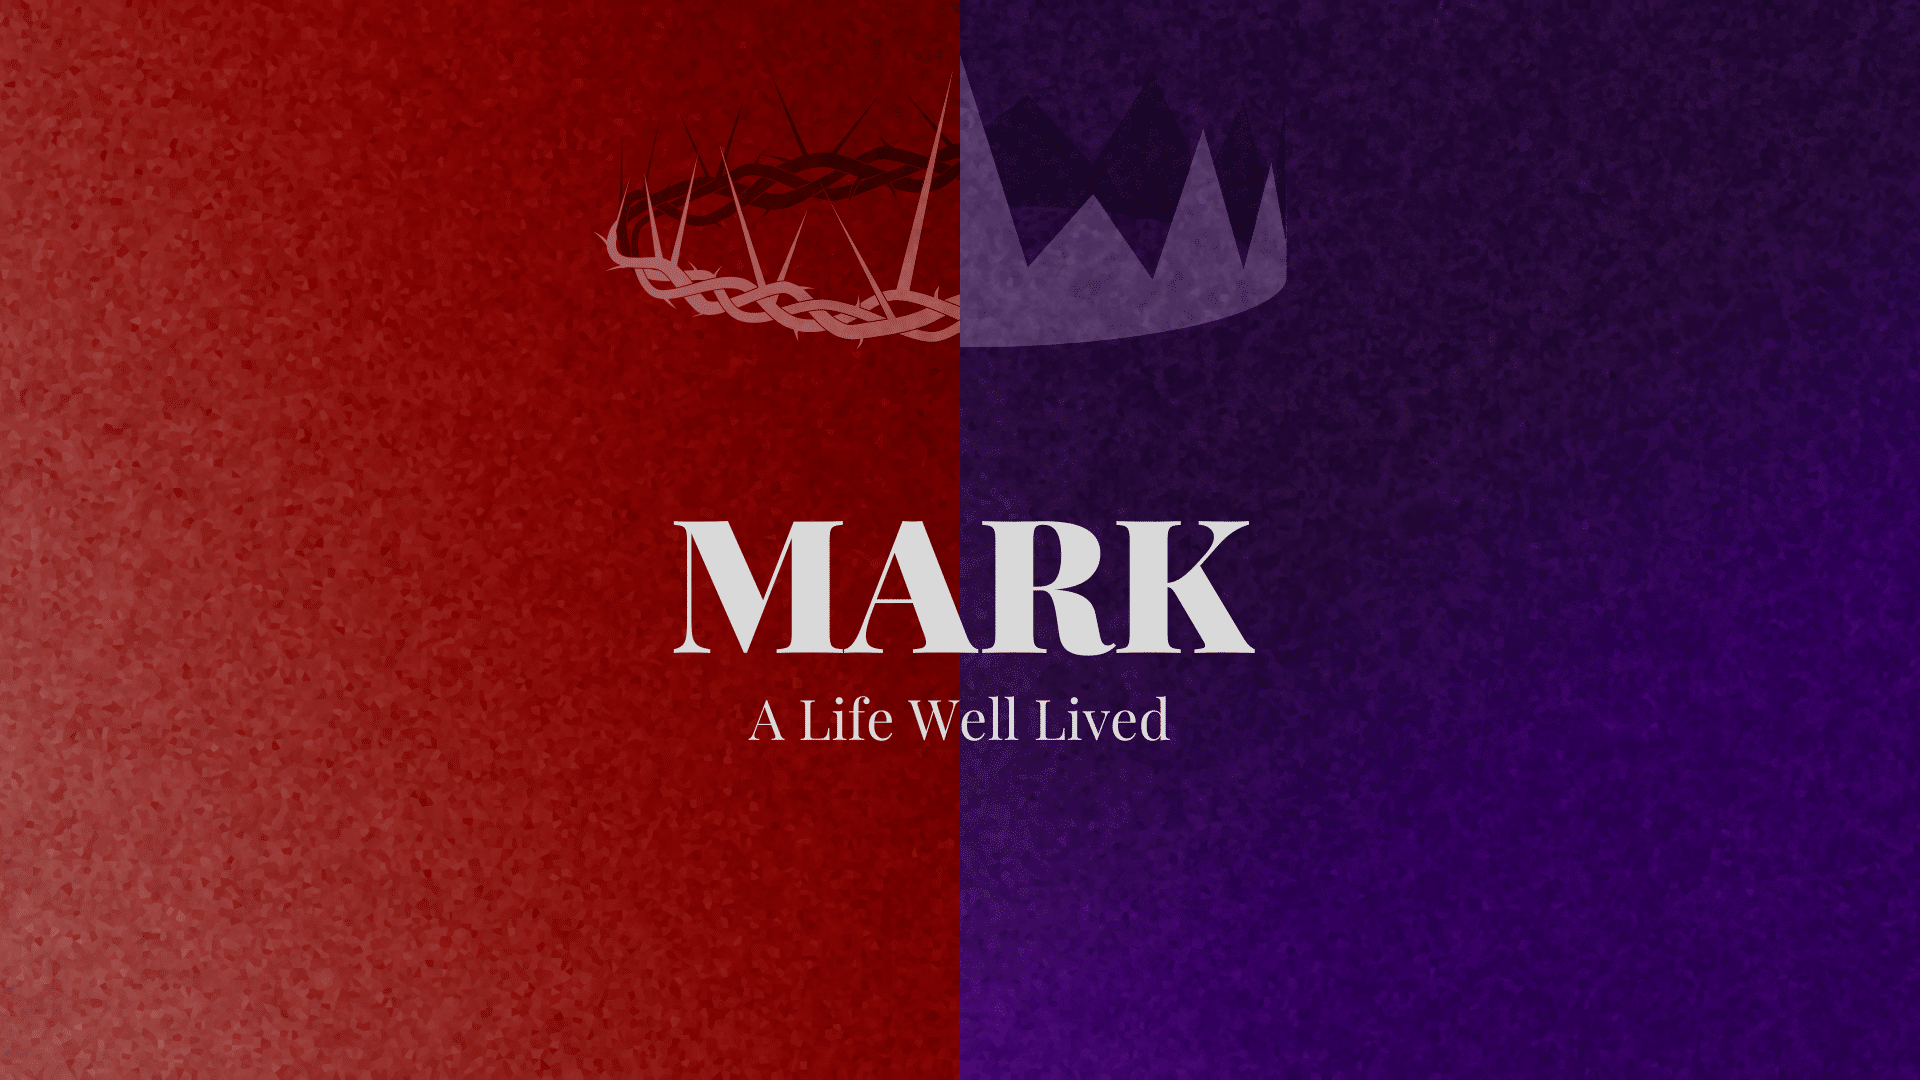 Mark: A Life Well Lived